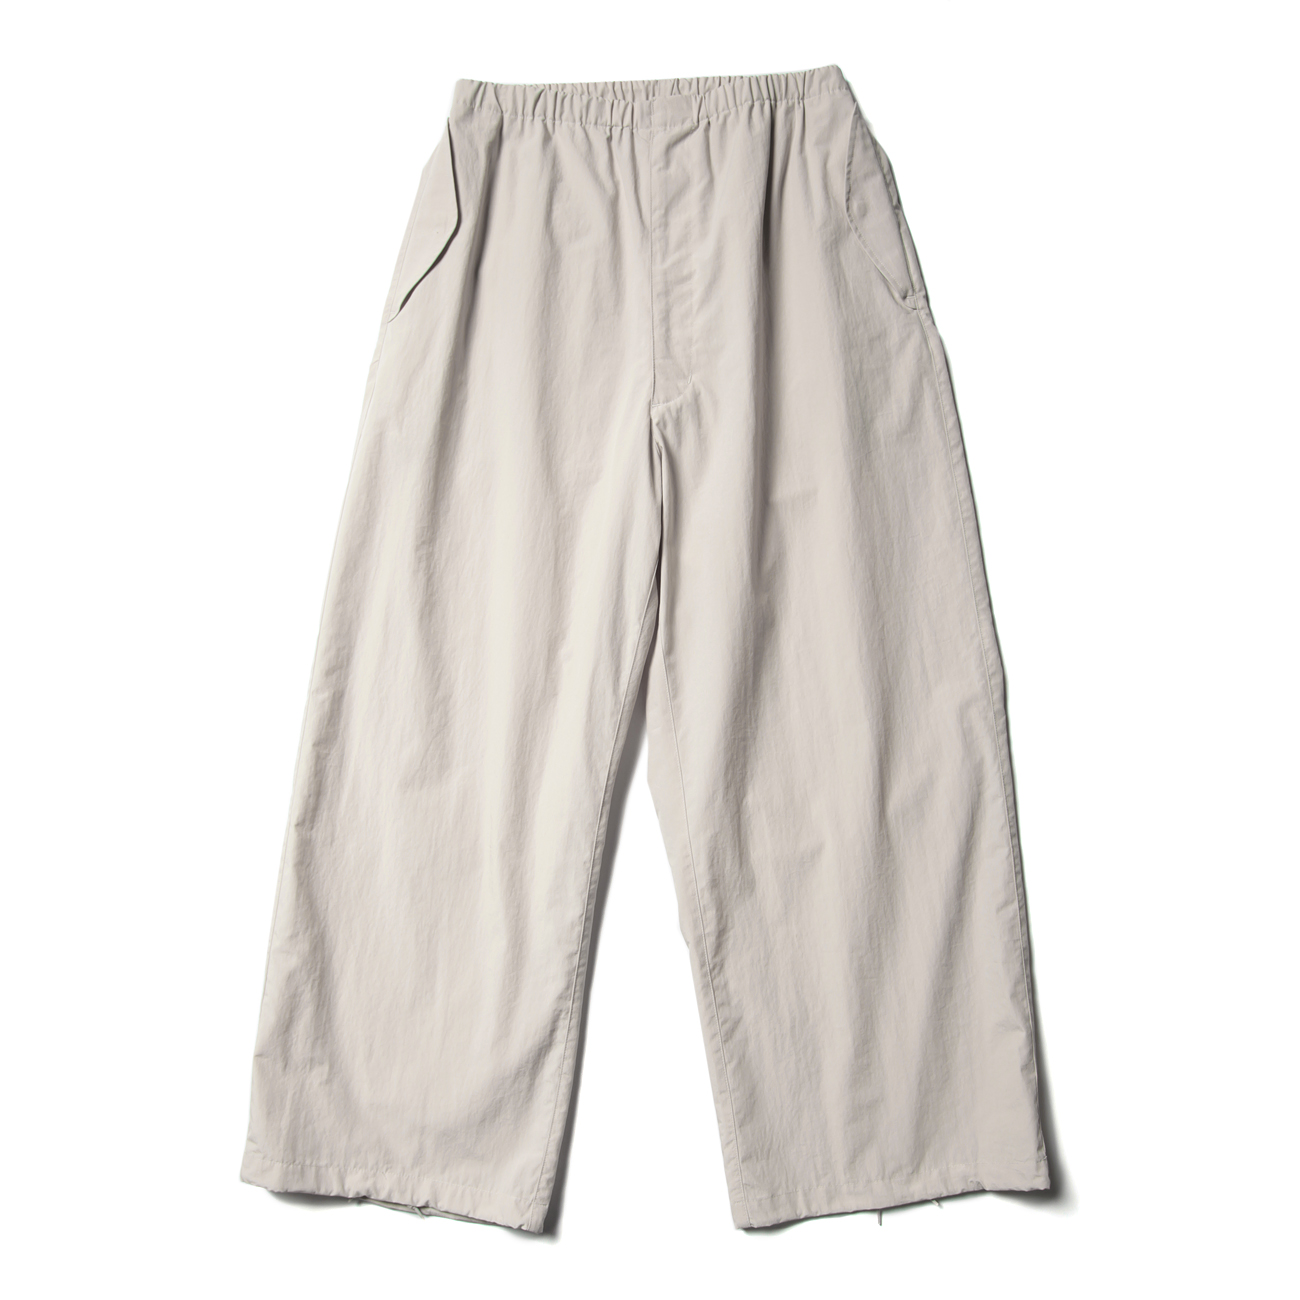 MILITARY WIDE EASY OVER PANTS - Fog White